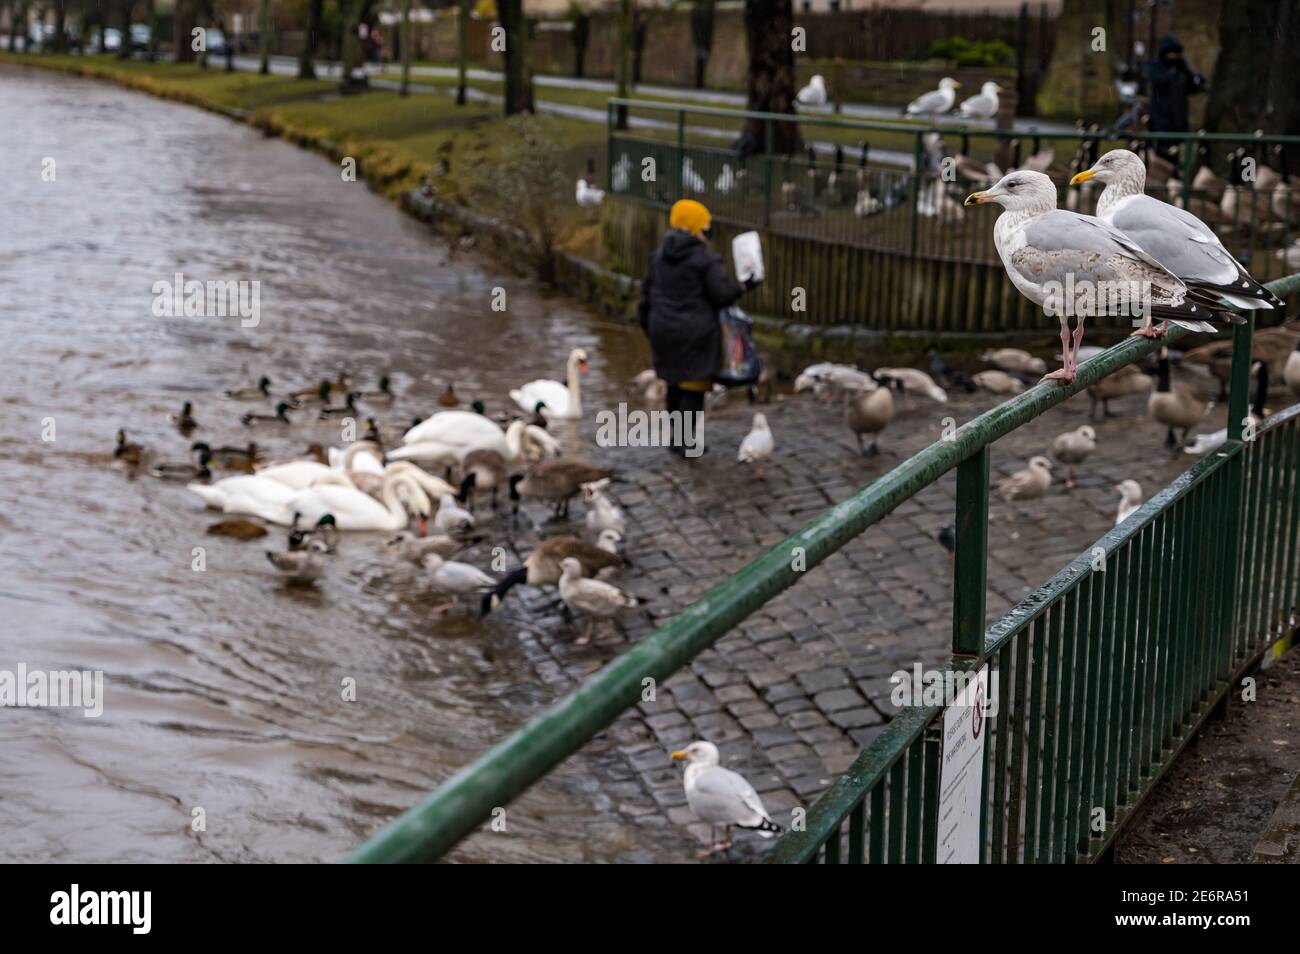 Musselburgh, East Lothian, Scotland, United Kingdom, 29th January 2021. UK Weather: Rain causes River Esk to rise & wildlife being fed. Heavy rain, of which more is forecast over the weekend, results in a swollen river, with the water level almost up to the top of the riverbank. A woman feeds the local birdlife including Canada geese, swans and gulls, despite nearby notices advising people not to feed the waterfowl Stock Photo